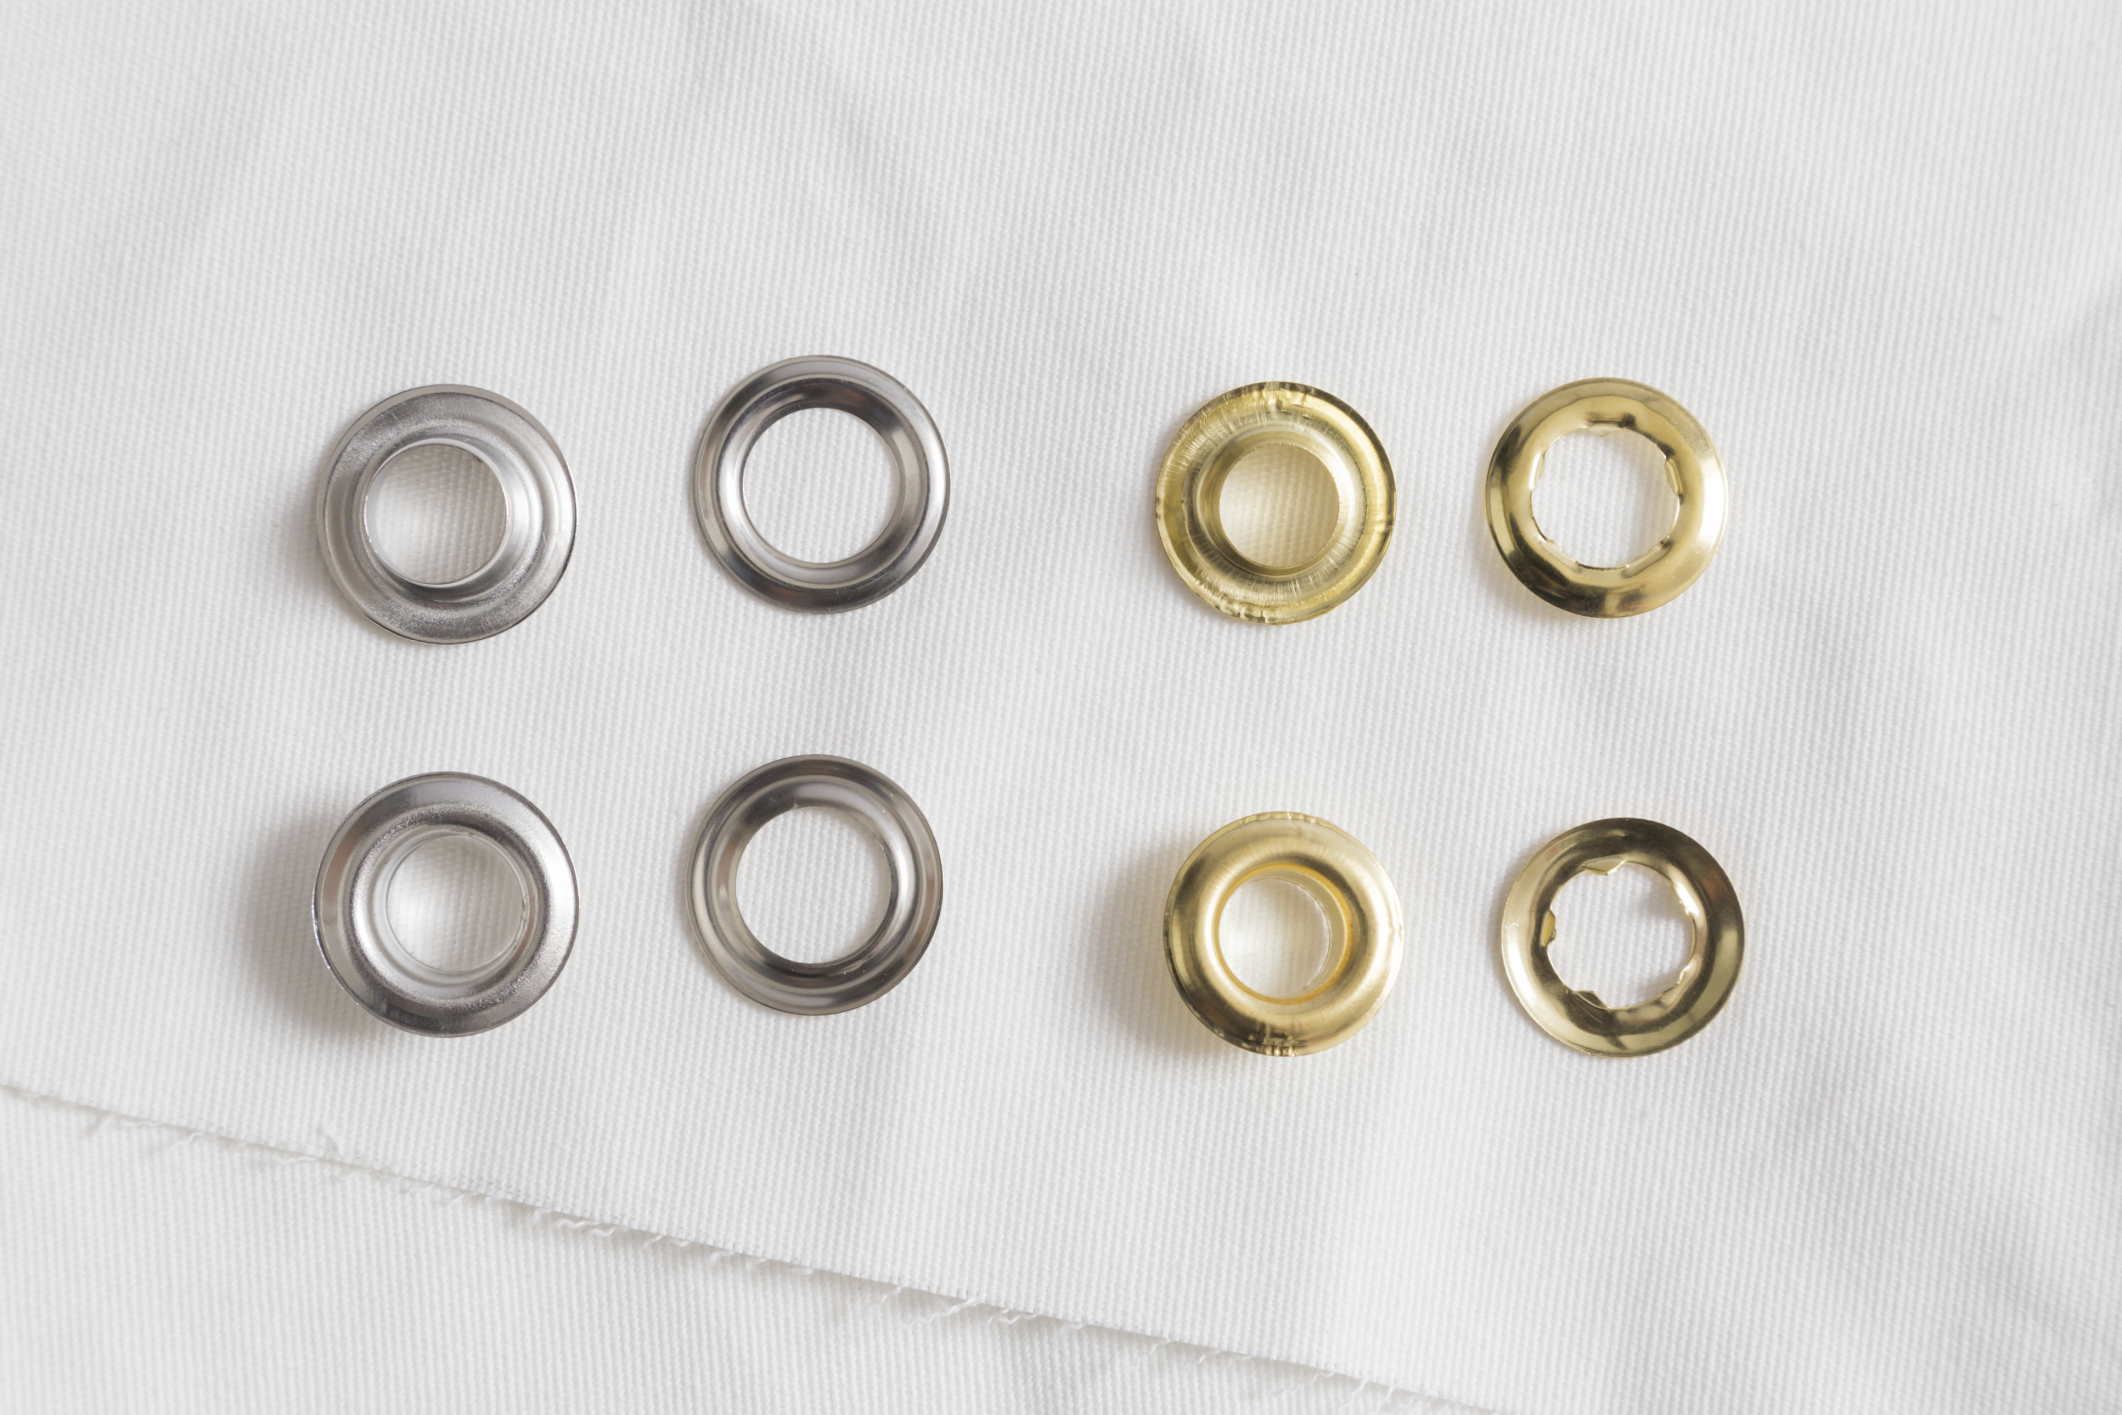 Metal Grommets (Eyelets) : Simple tools and ways to set them on fabric -  SewGuide